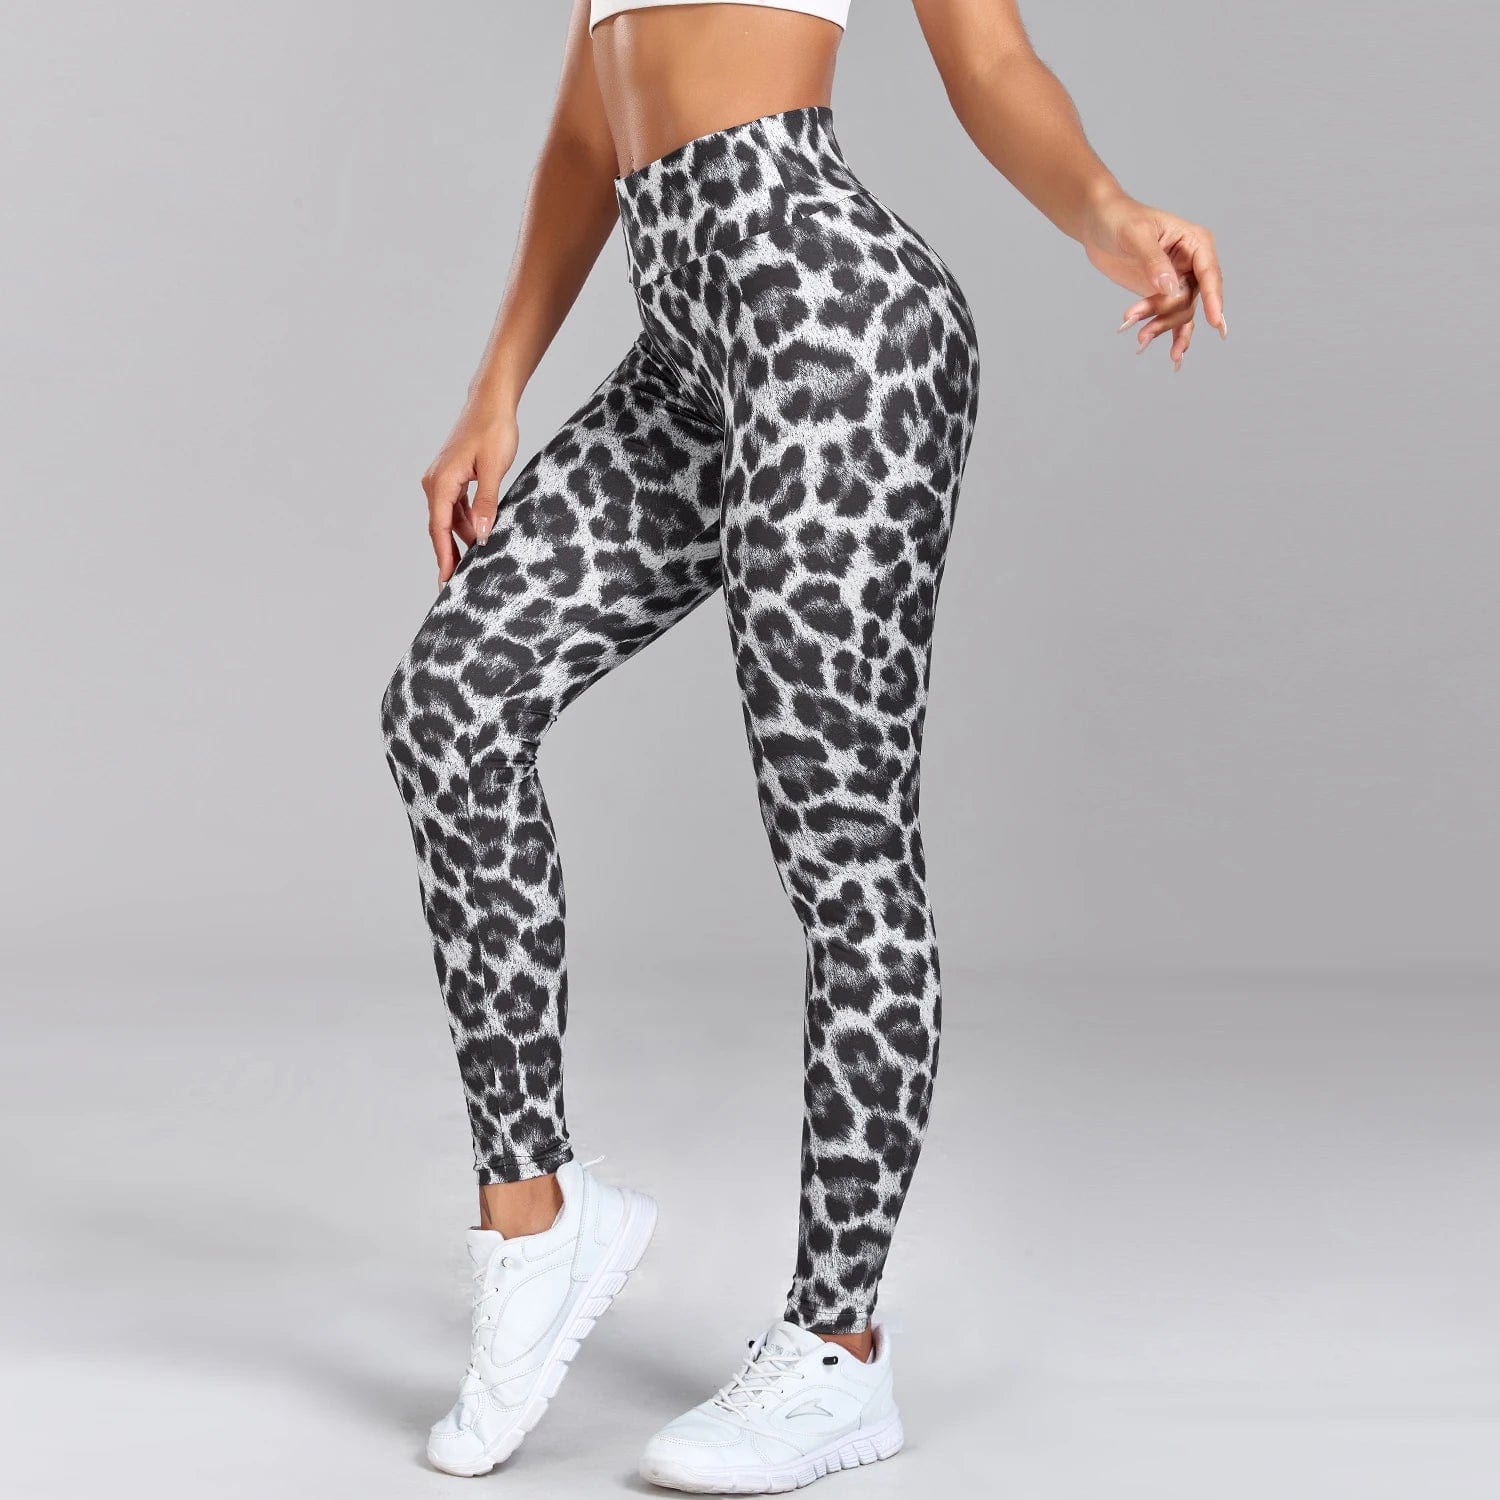 Leopard Clothing Black and white leopard leggings